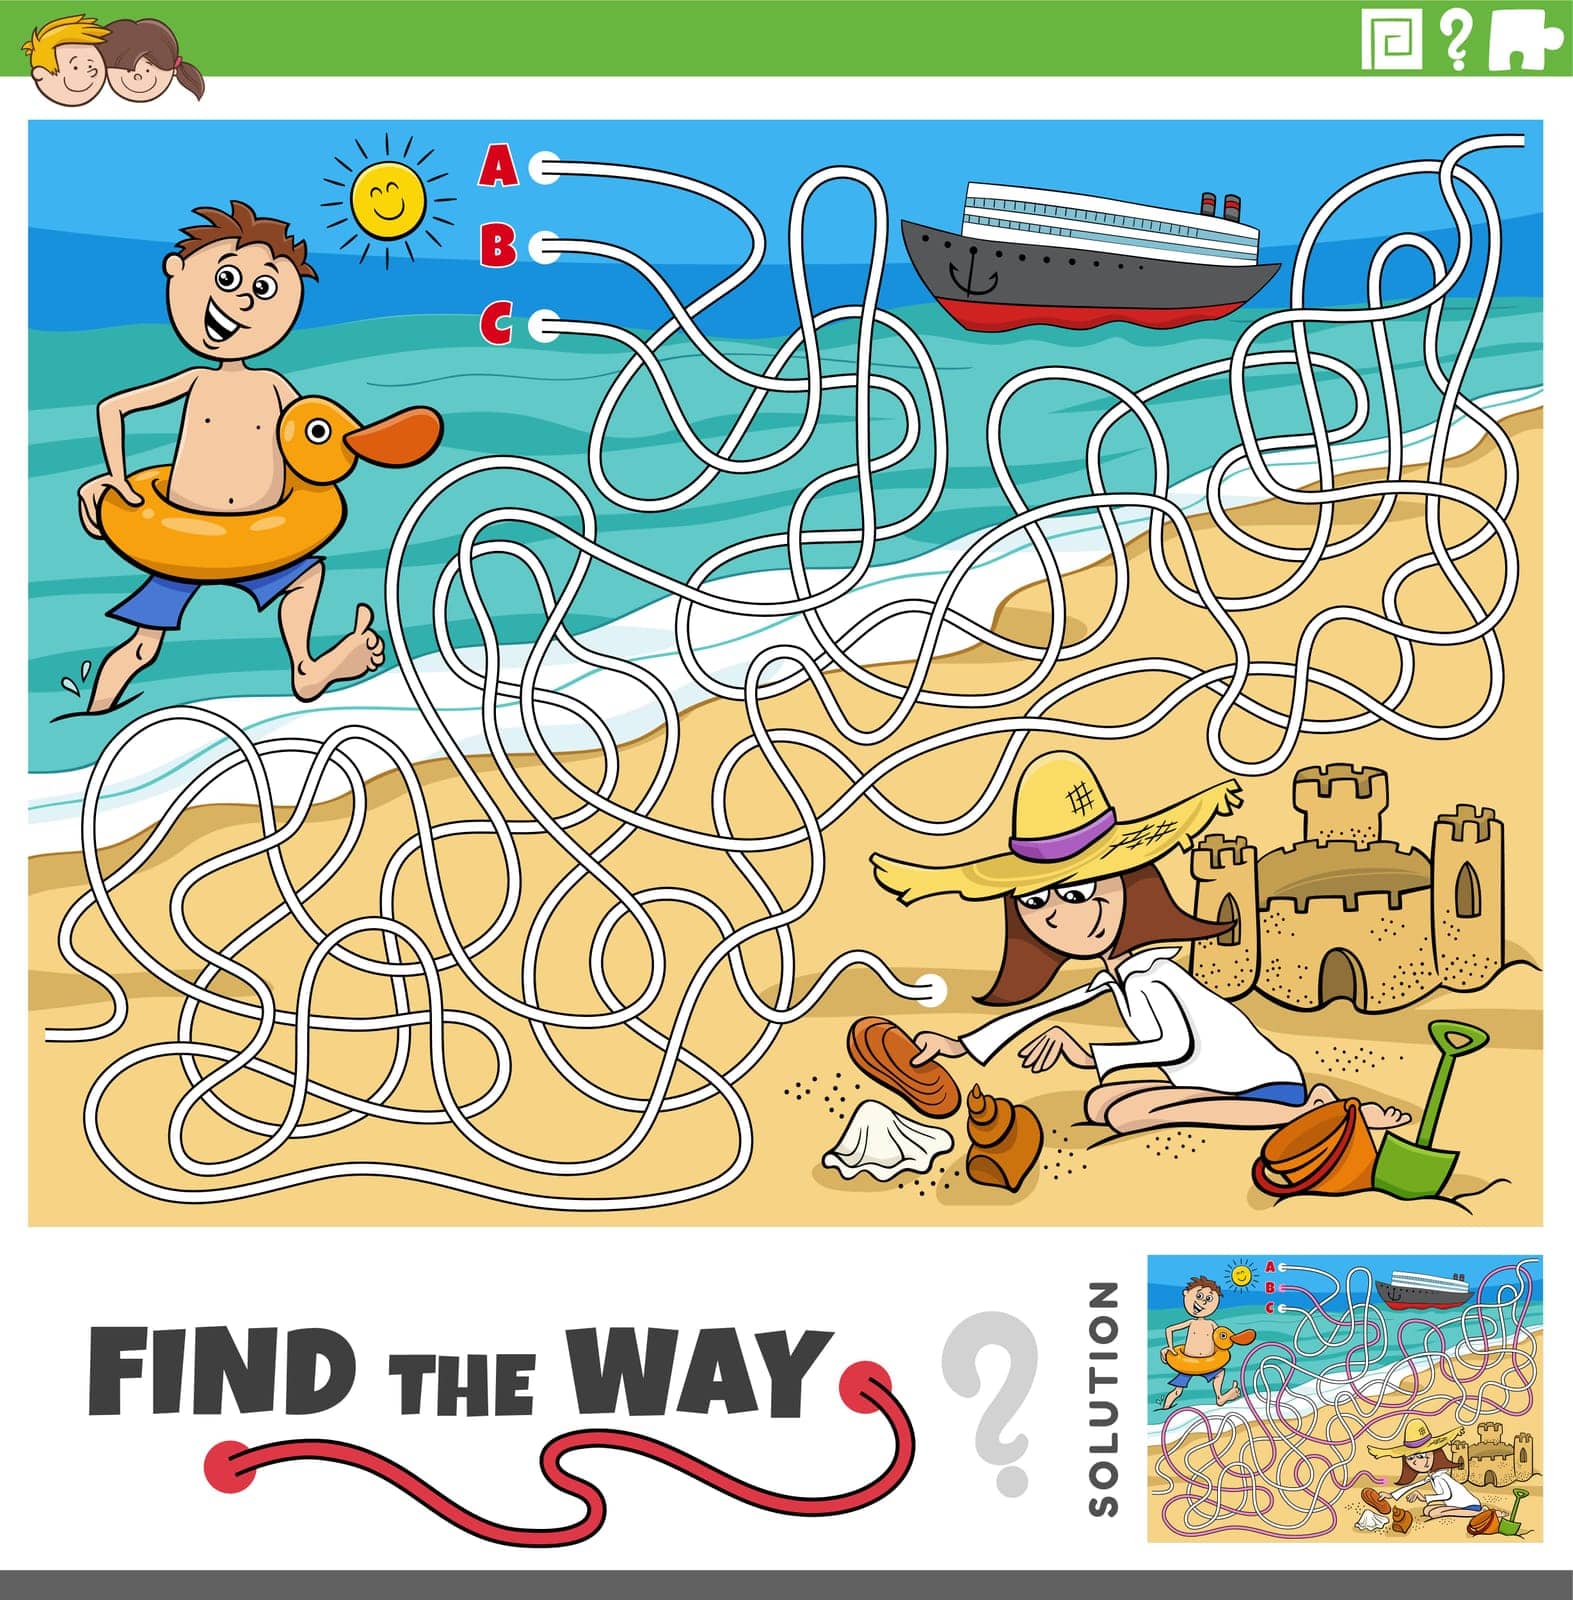 Cartoon illustration of find the way maze puzzle activity with children on vacation by the sea